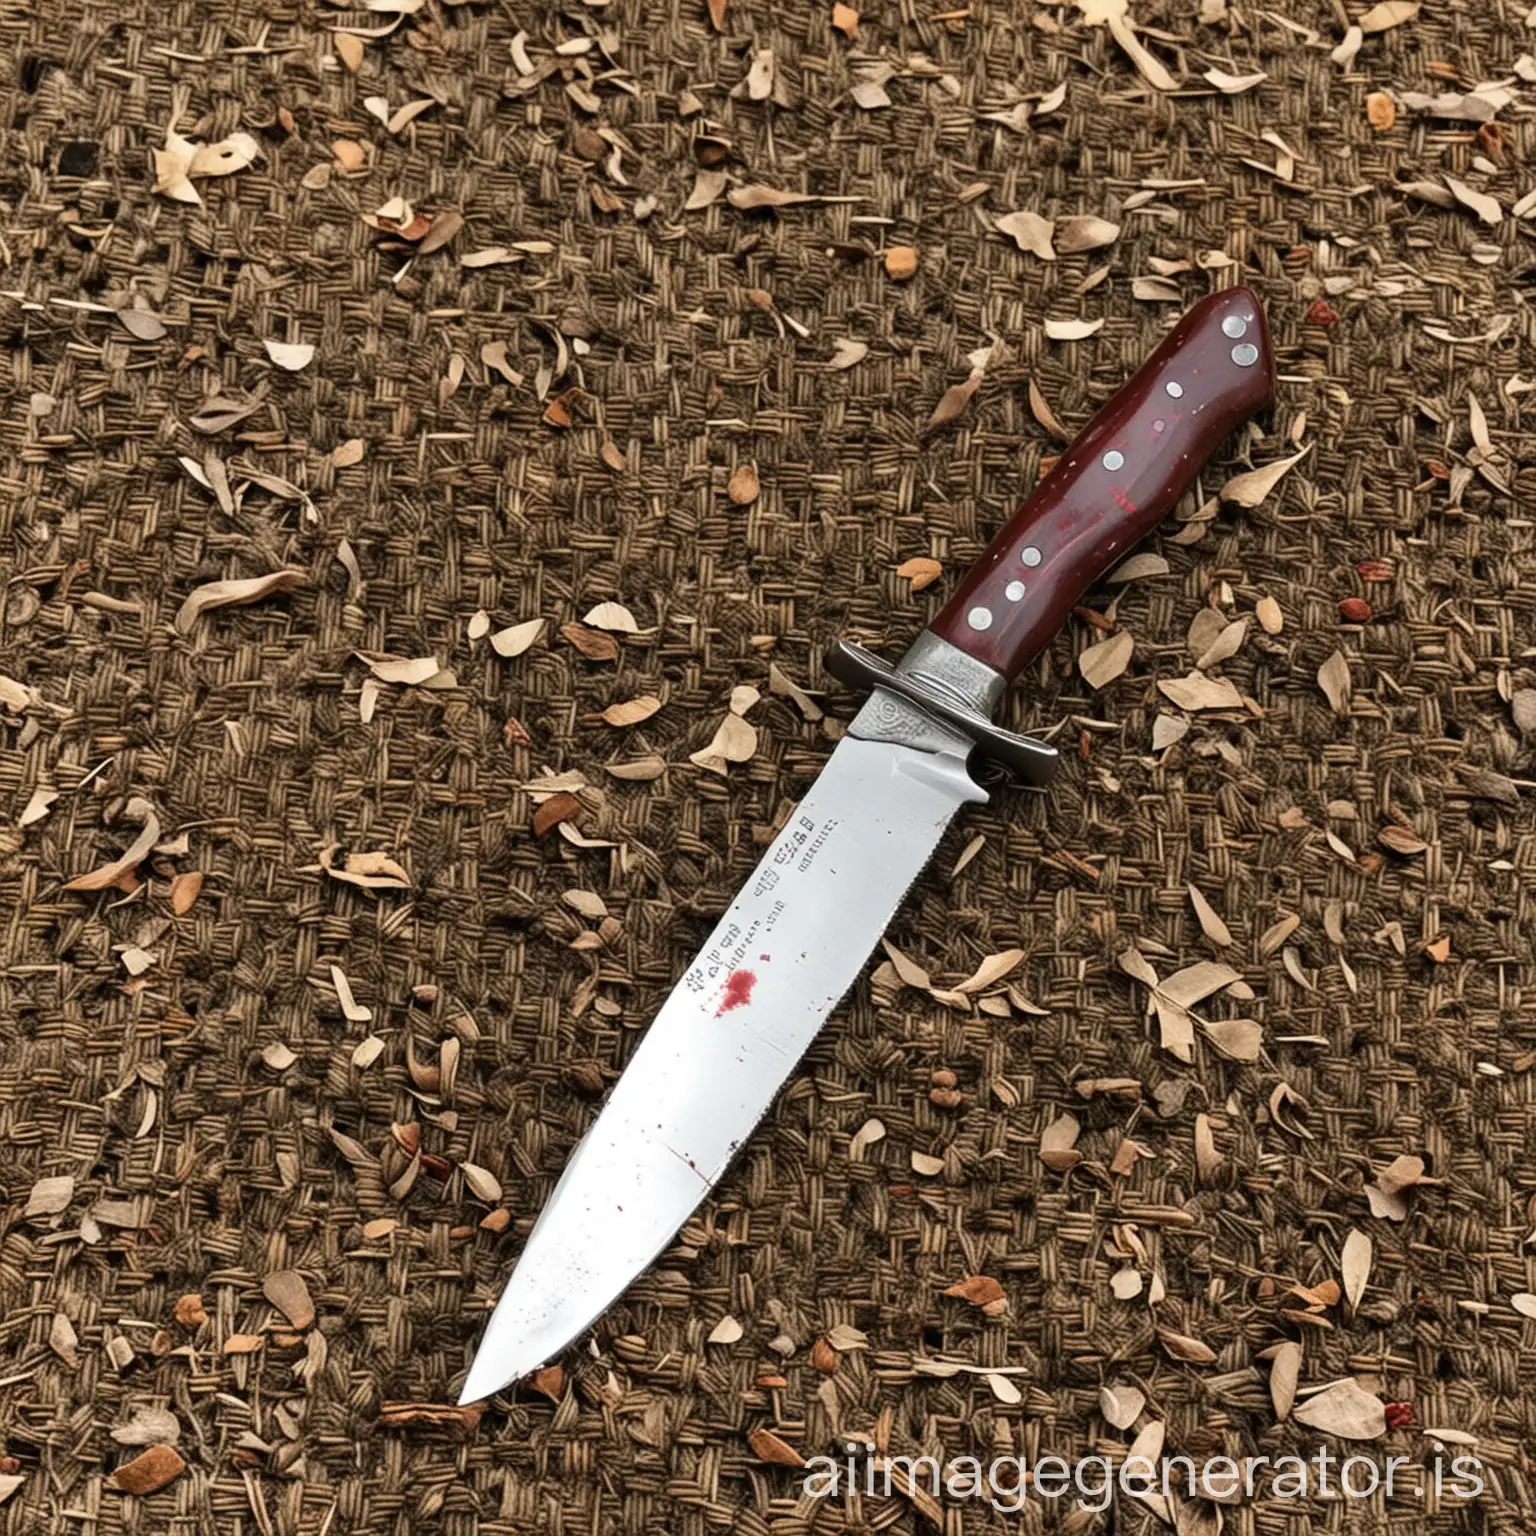 A knife with Mr. Kelly’s blood on it was found in Miss Kathryn's yard.